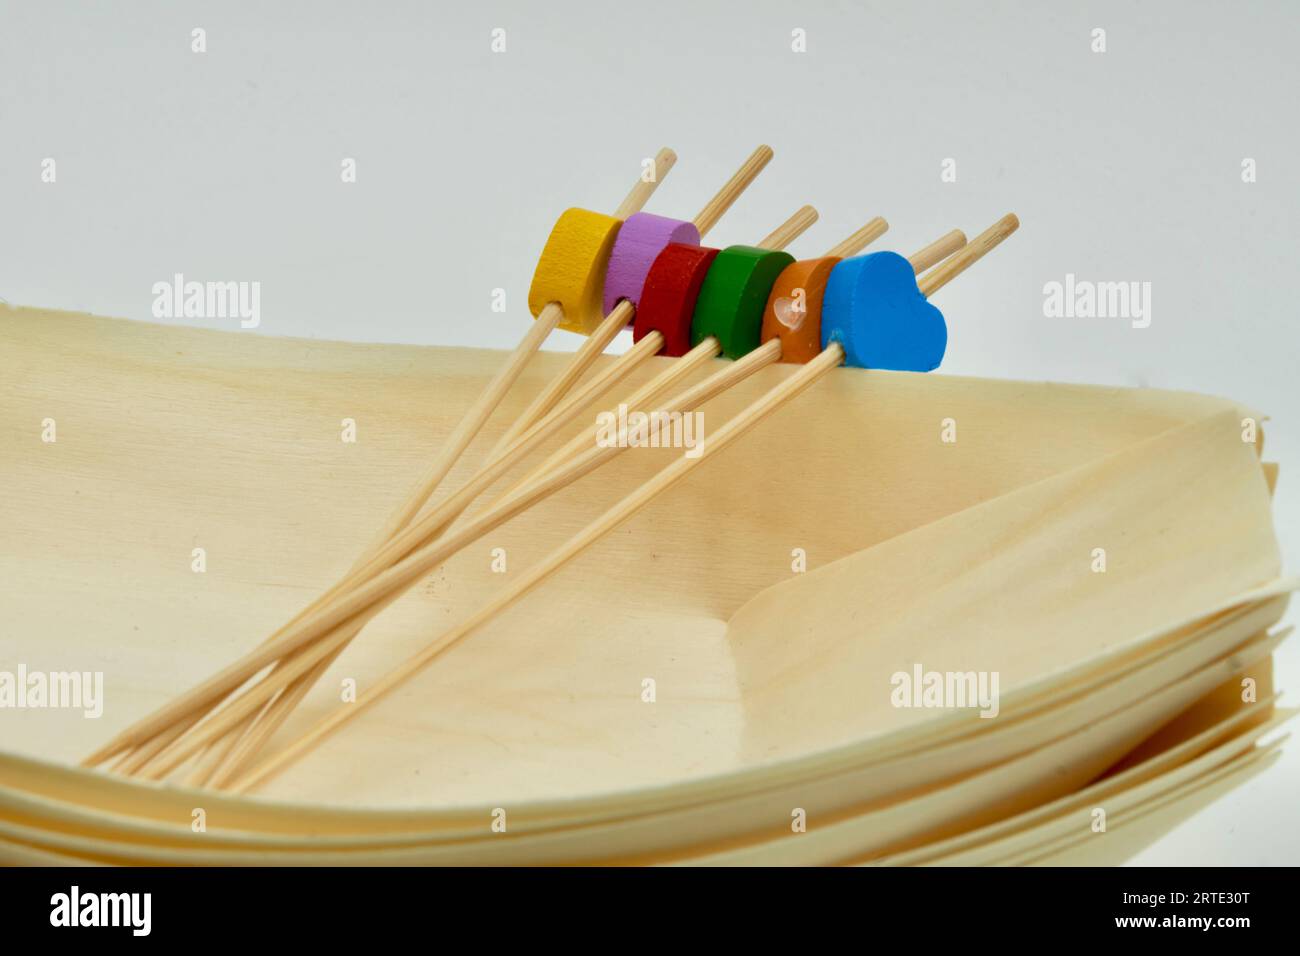 Environmentally friendly disposable Wooden Serving Boats with Wooden food picks and Colourful Hearts Stock Photo